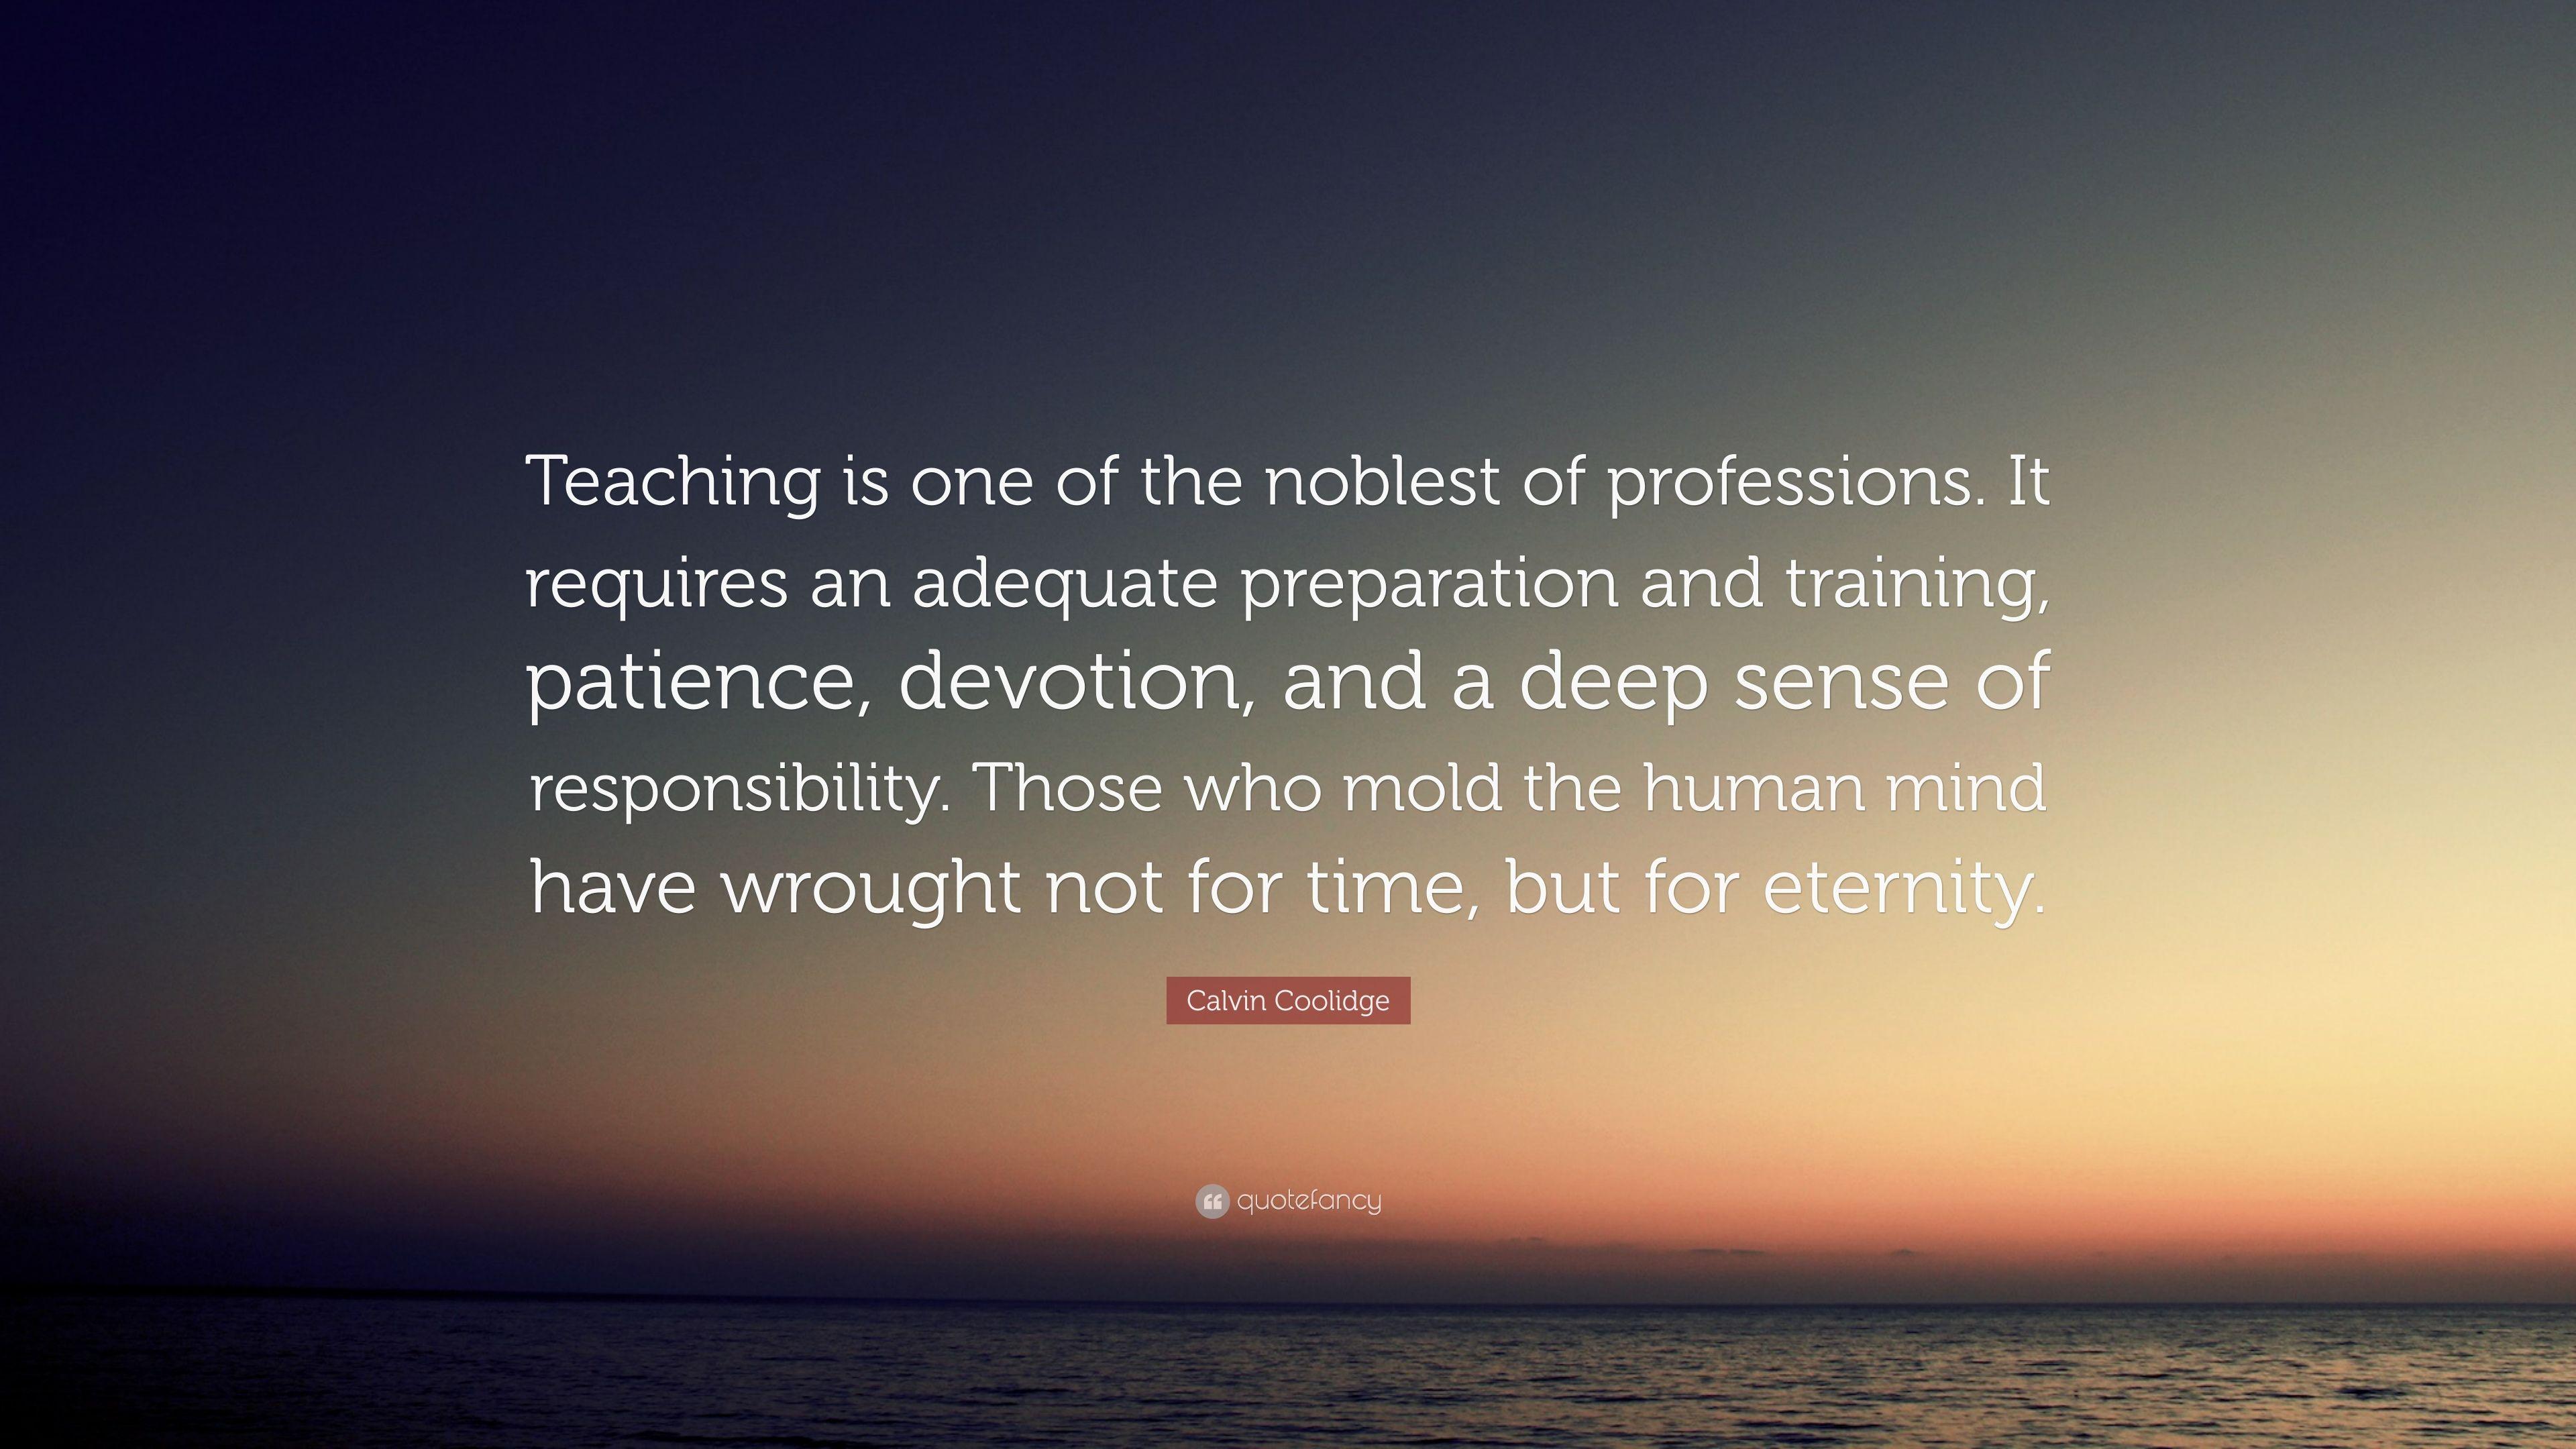 Calvin Coolidge Quote: “Teaching is one of the noblest